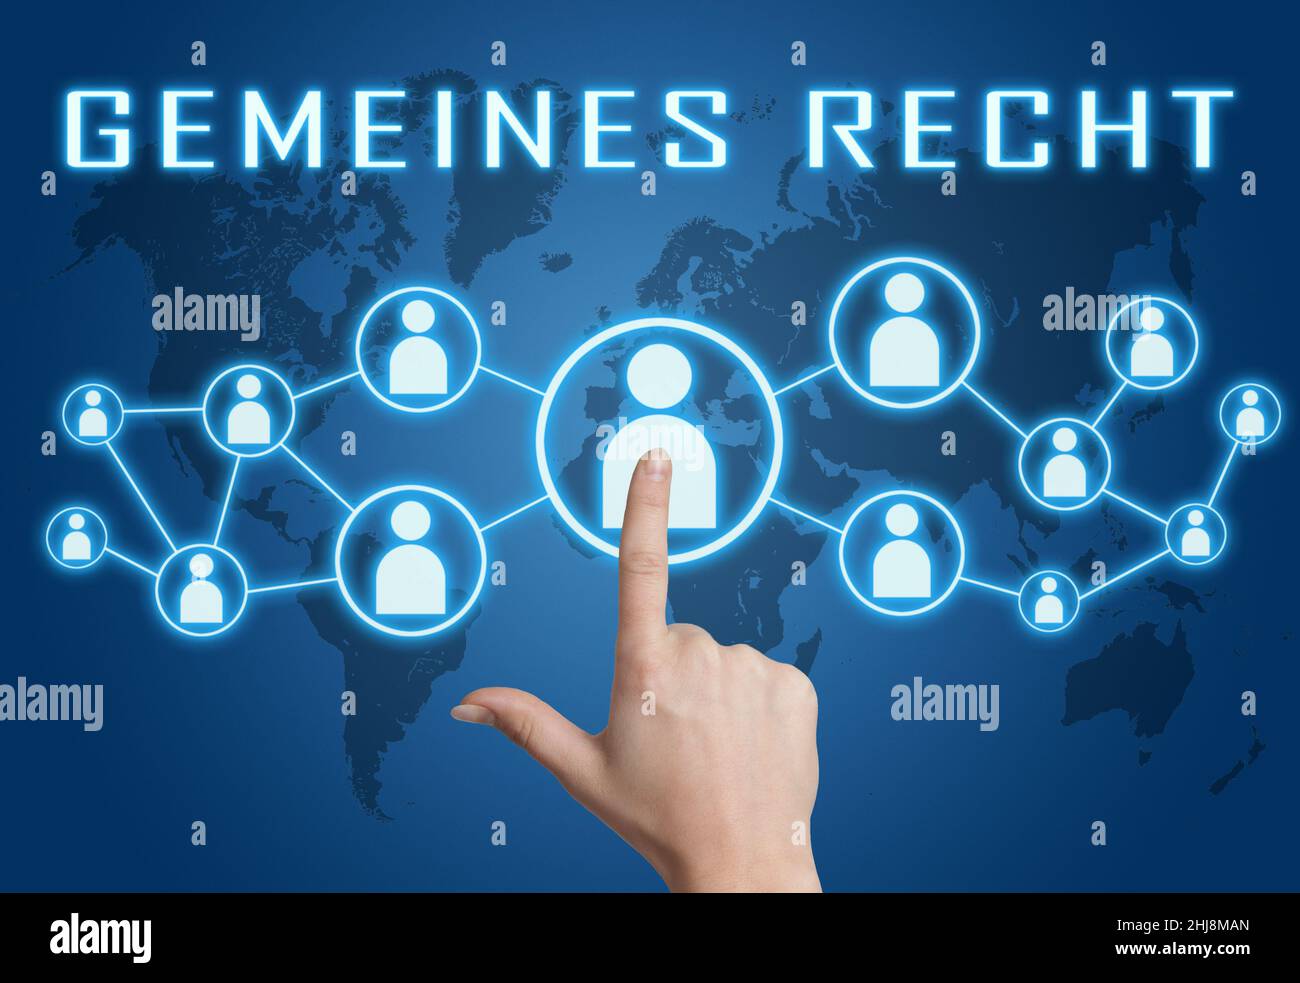 Gemeines Recht - german word for common right - text concept with hand pressing social icons on blue world map background. Stock Photo